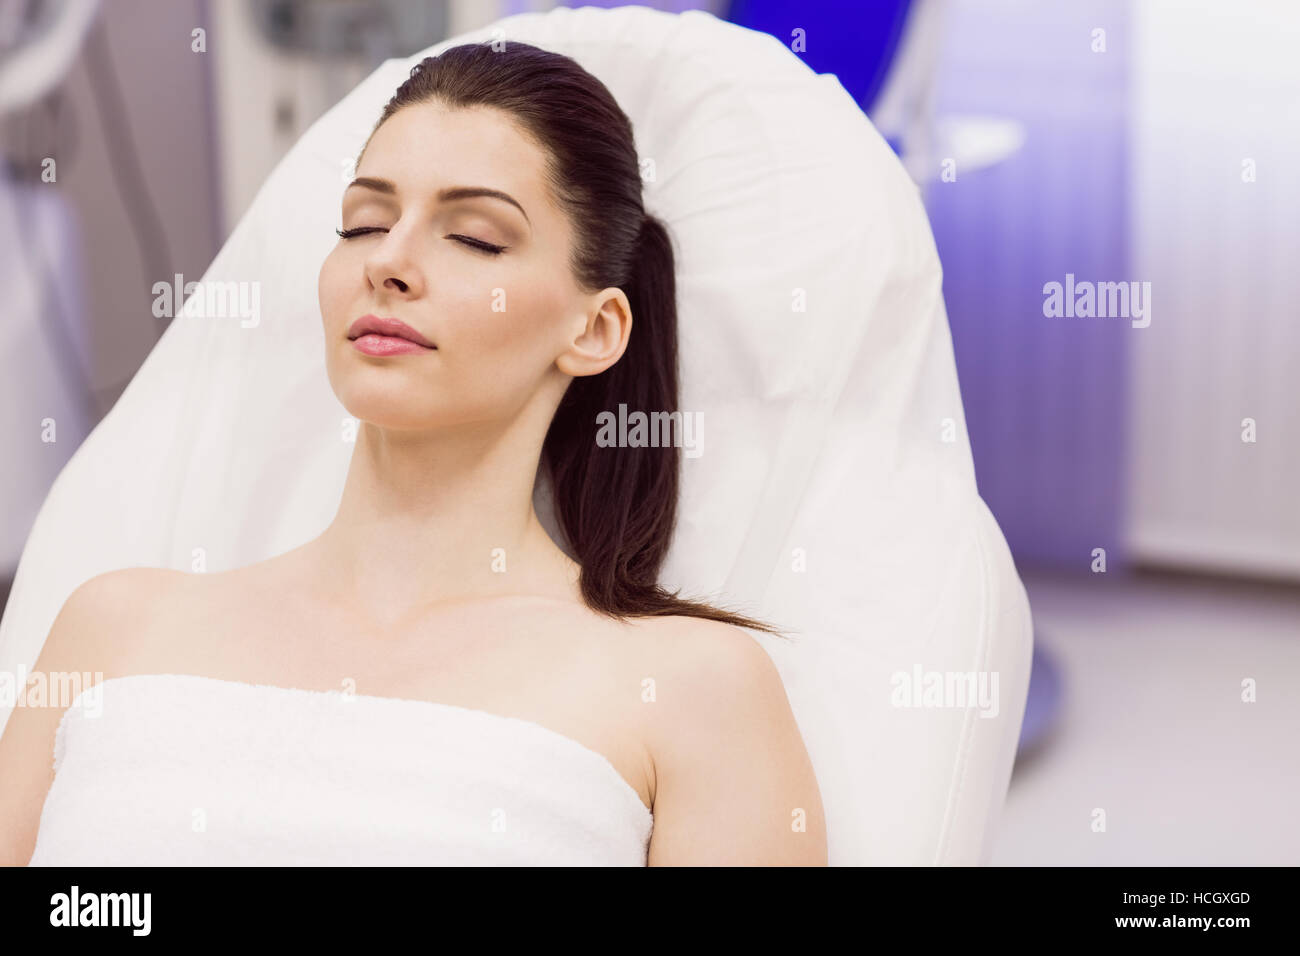 Female patient lying on dermatology chair Stock Photo